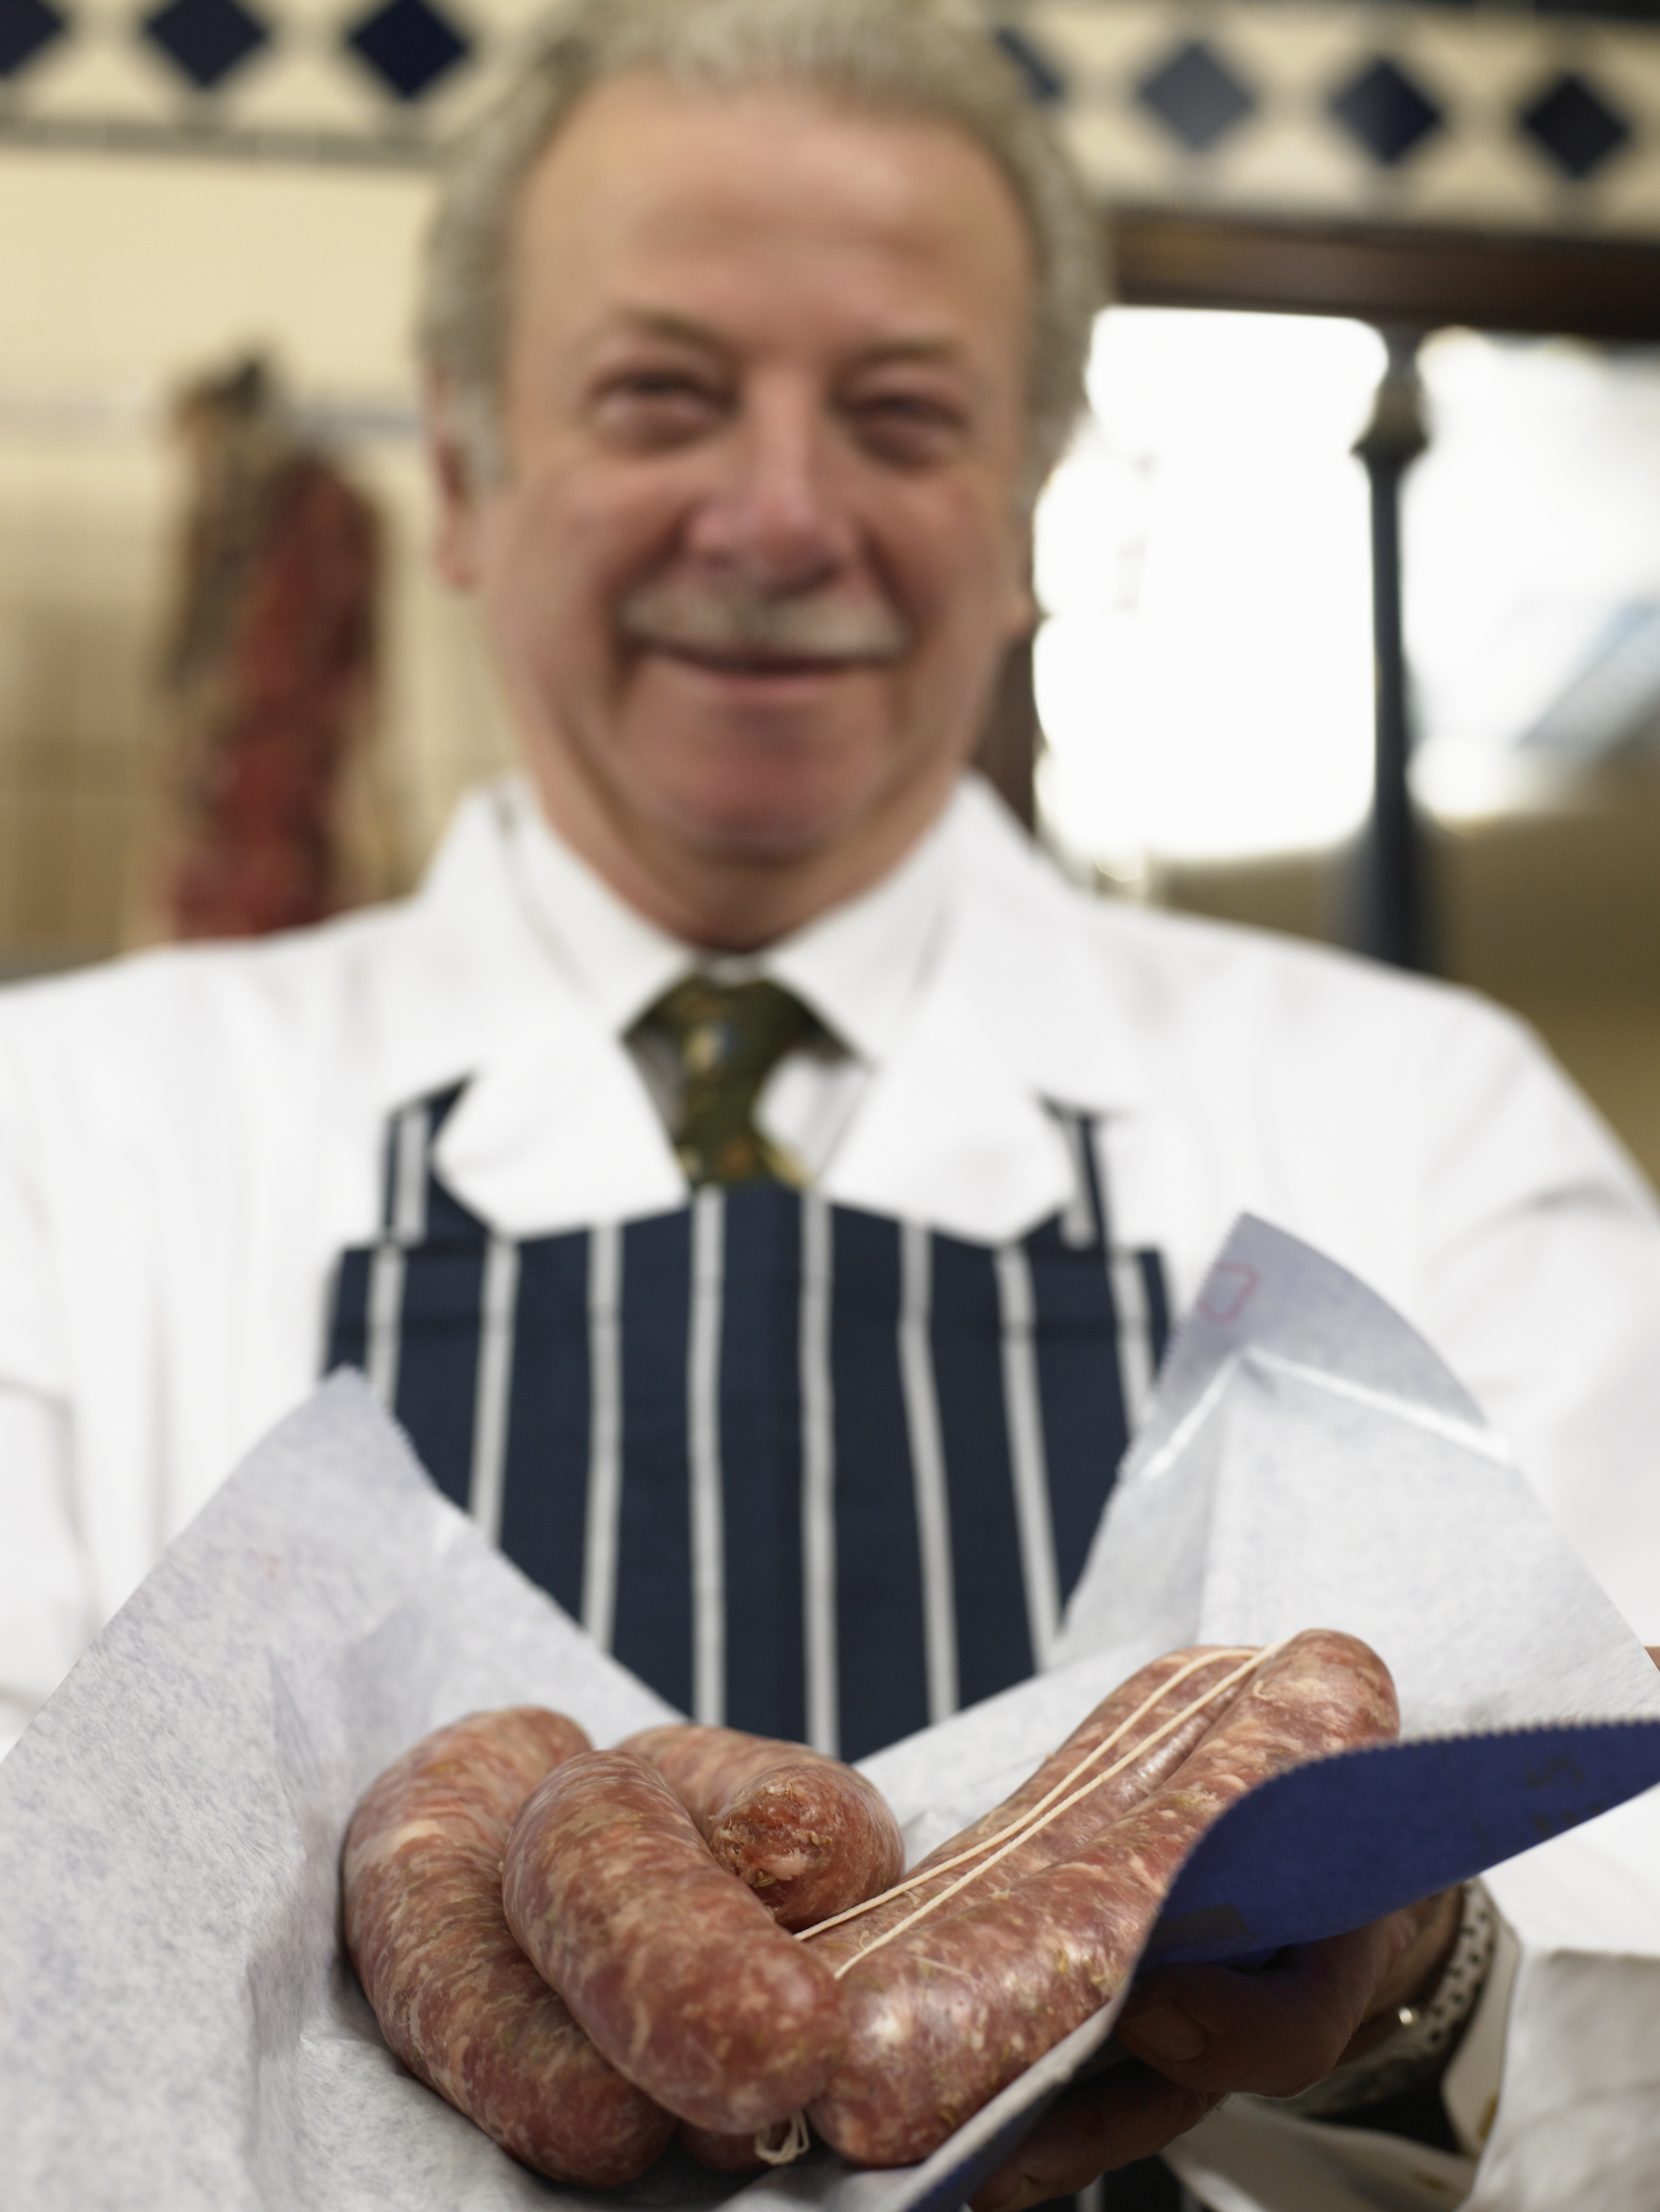 Butcher with striped apron and sausages